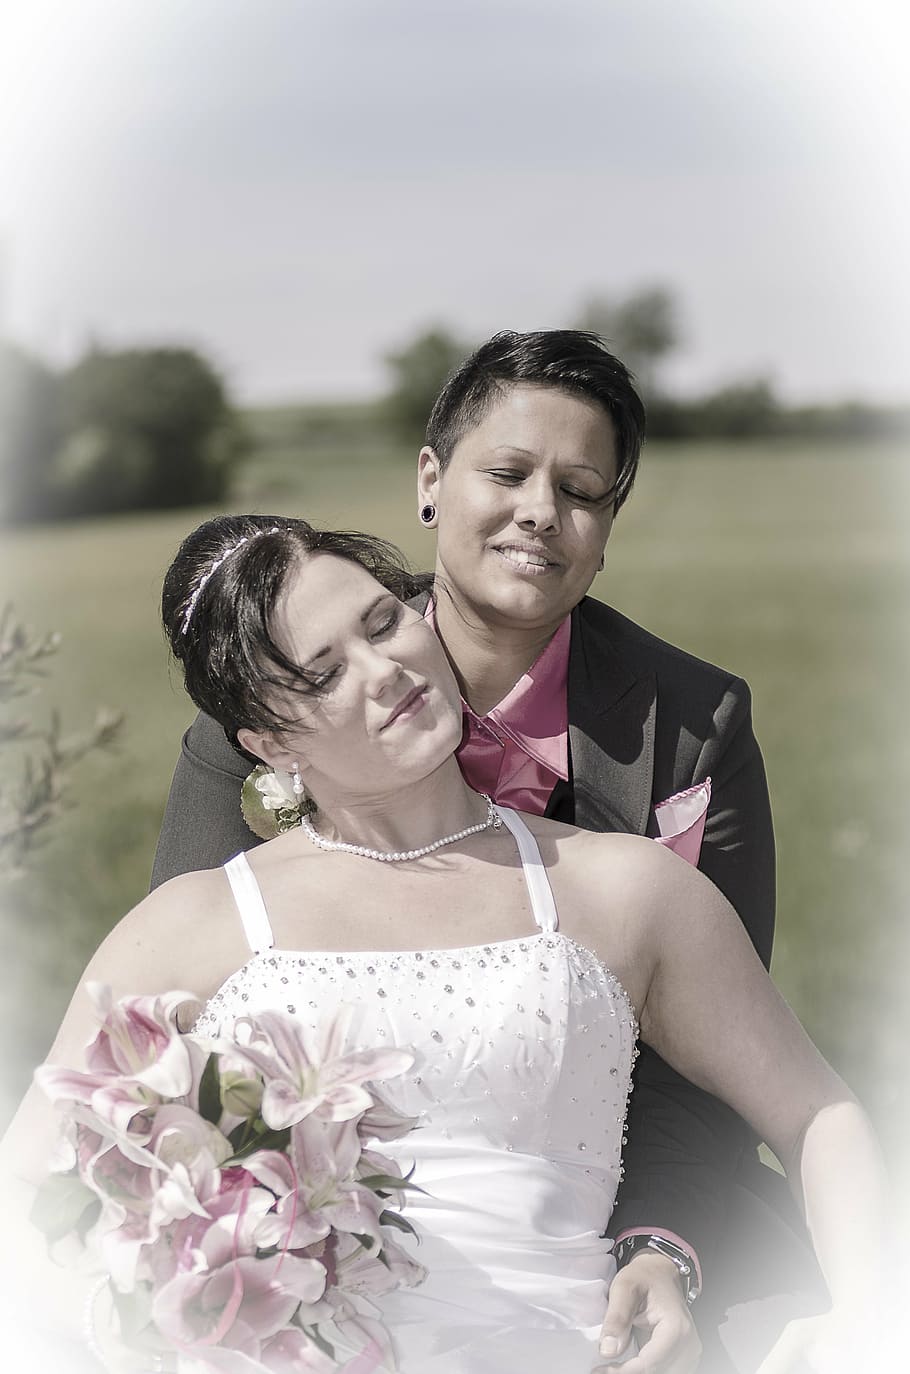 bride and groom, marry, wedding, love, same-sex marriage, bride, women, outdoors, married, smiling